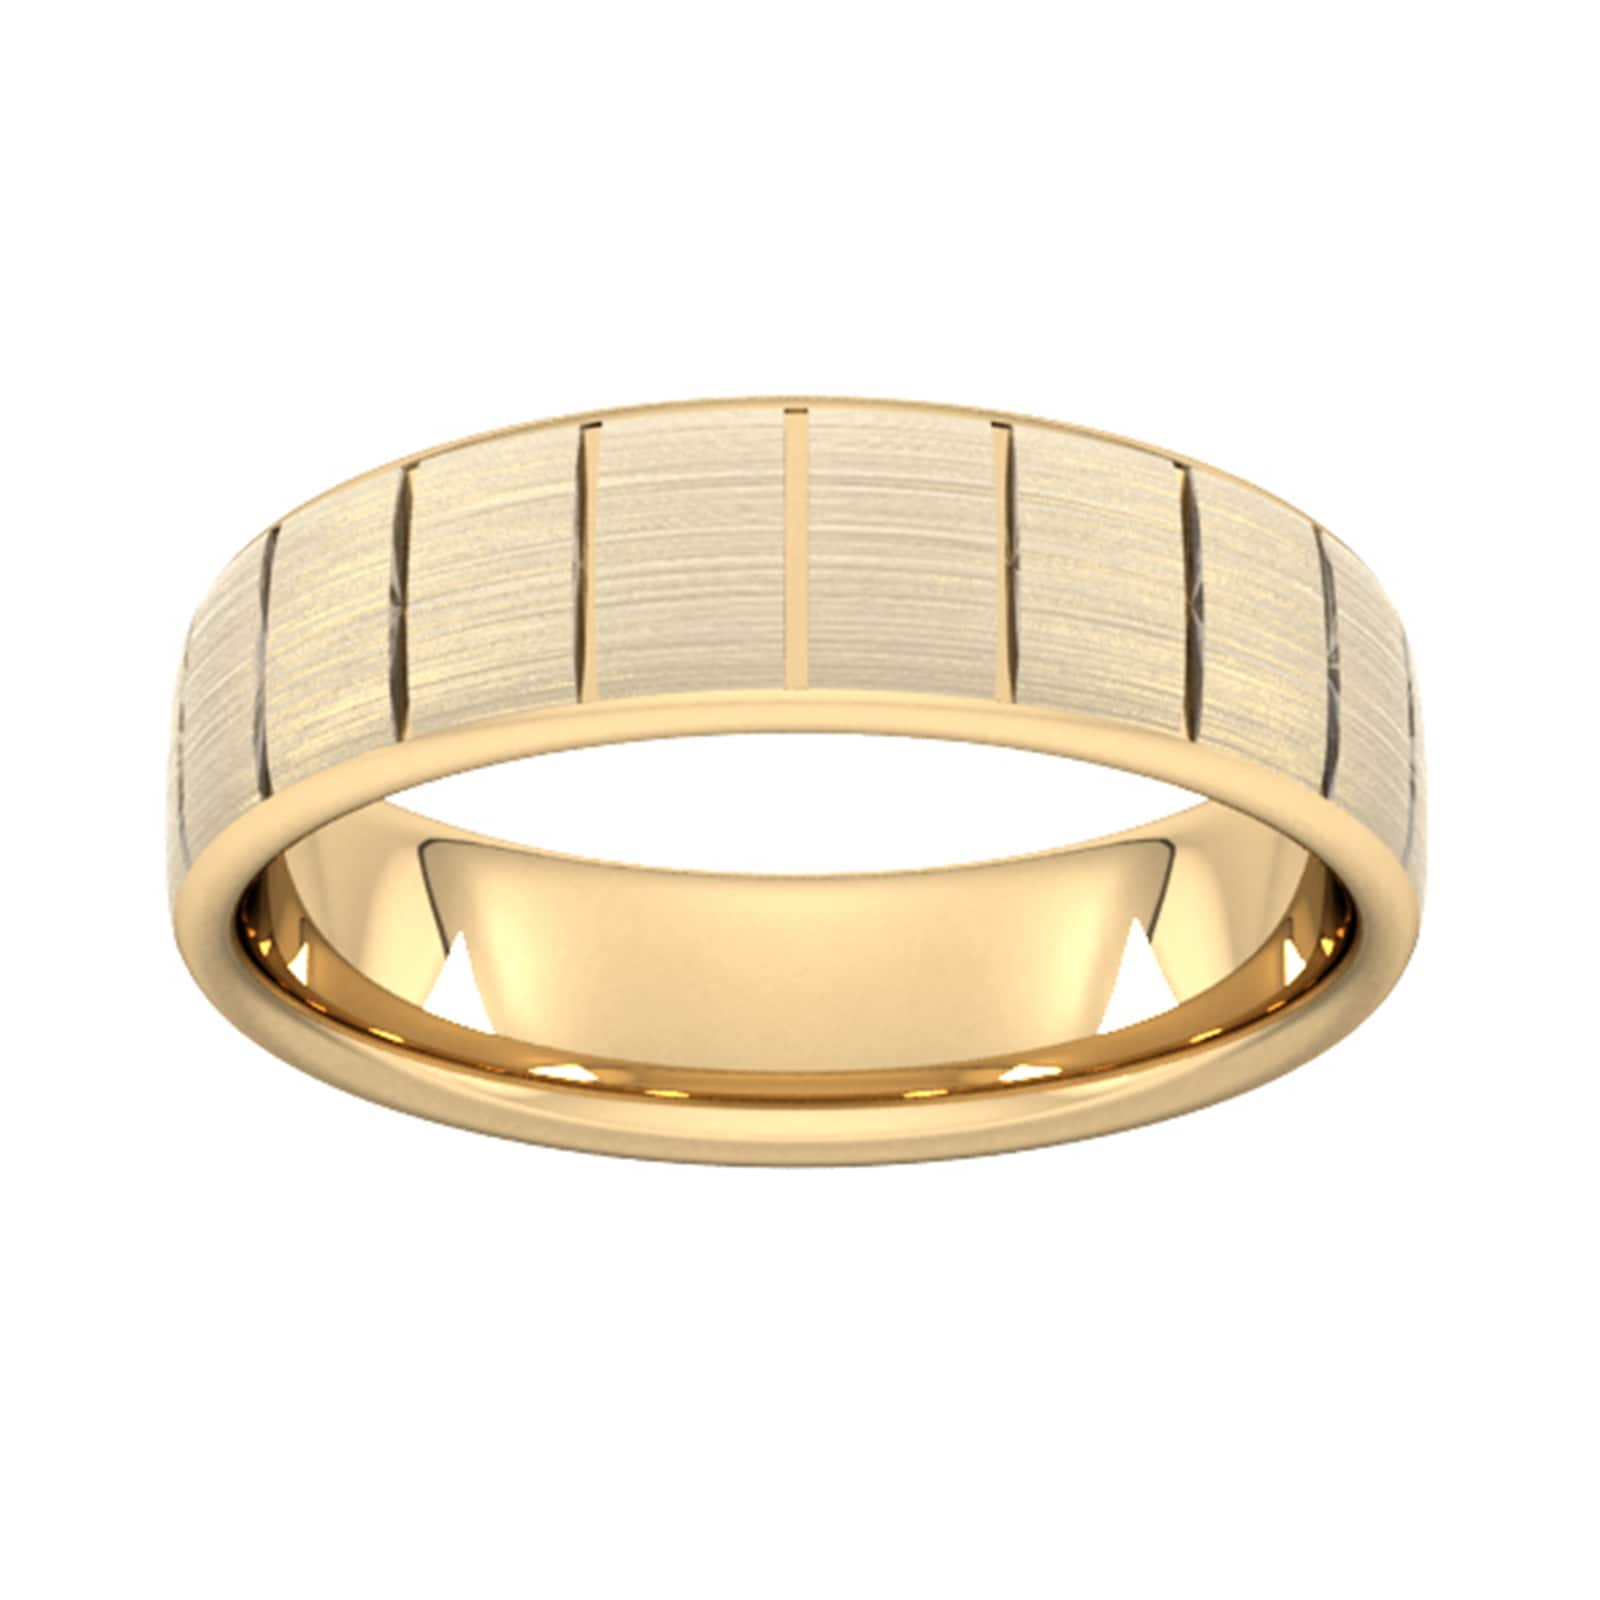 6mm Traditional Court Heavy Vertical Lines Wedding Ring In 18 Carat Yellow Gold - Ring Size R